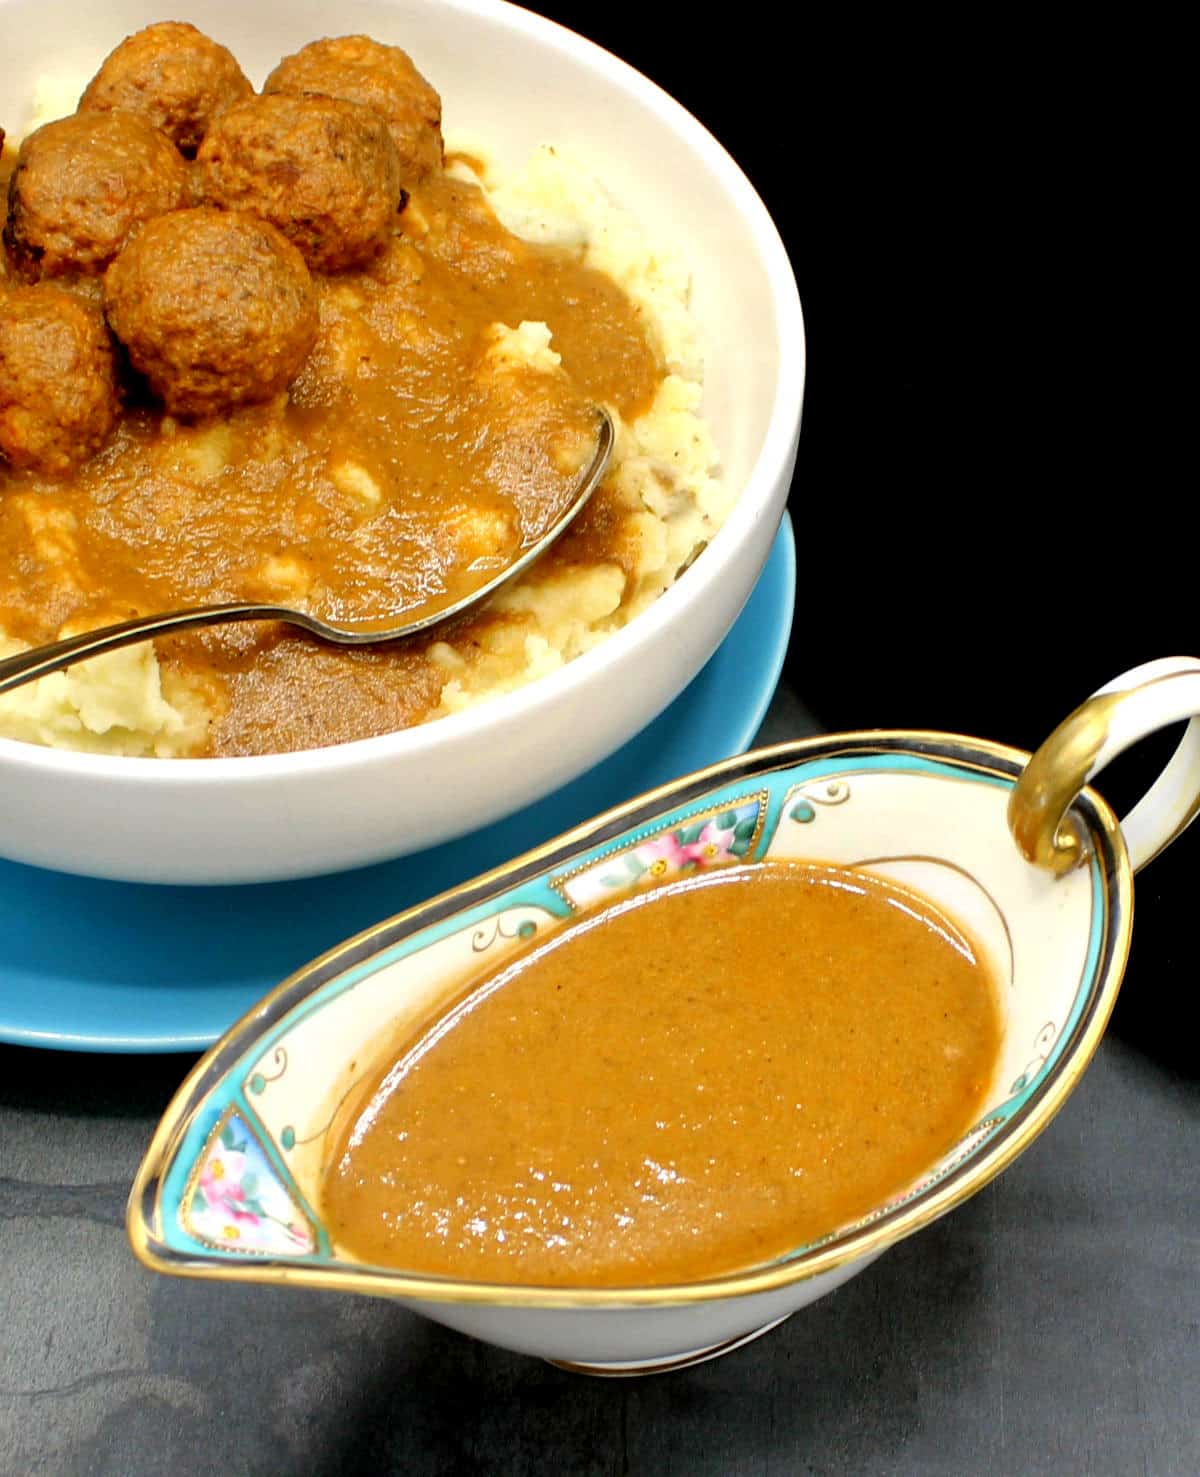 Front photo of vegan gravy in an ornate sauce boat with a bowl of vegan meatballs and mashed potatoes with gravy in the back.